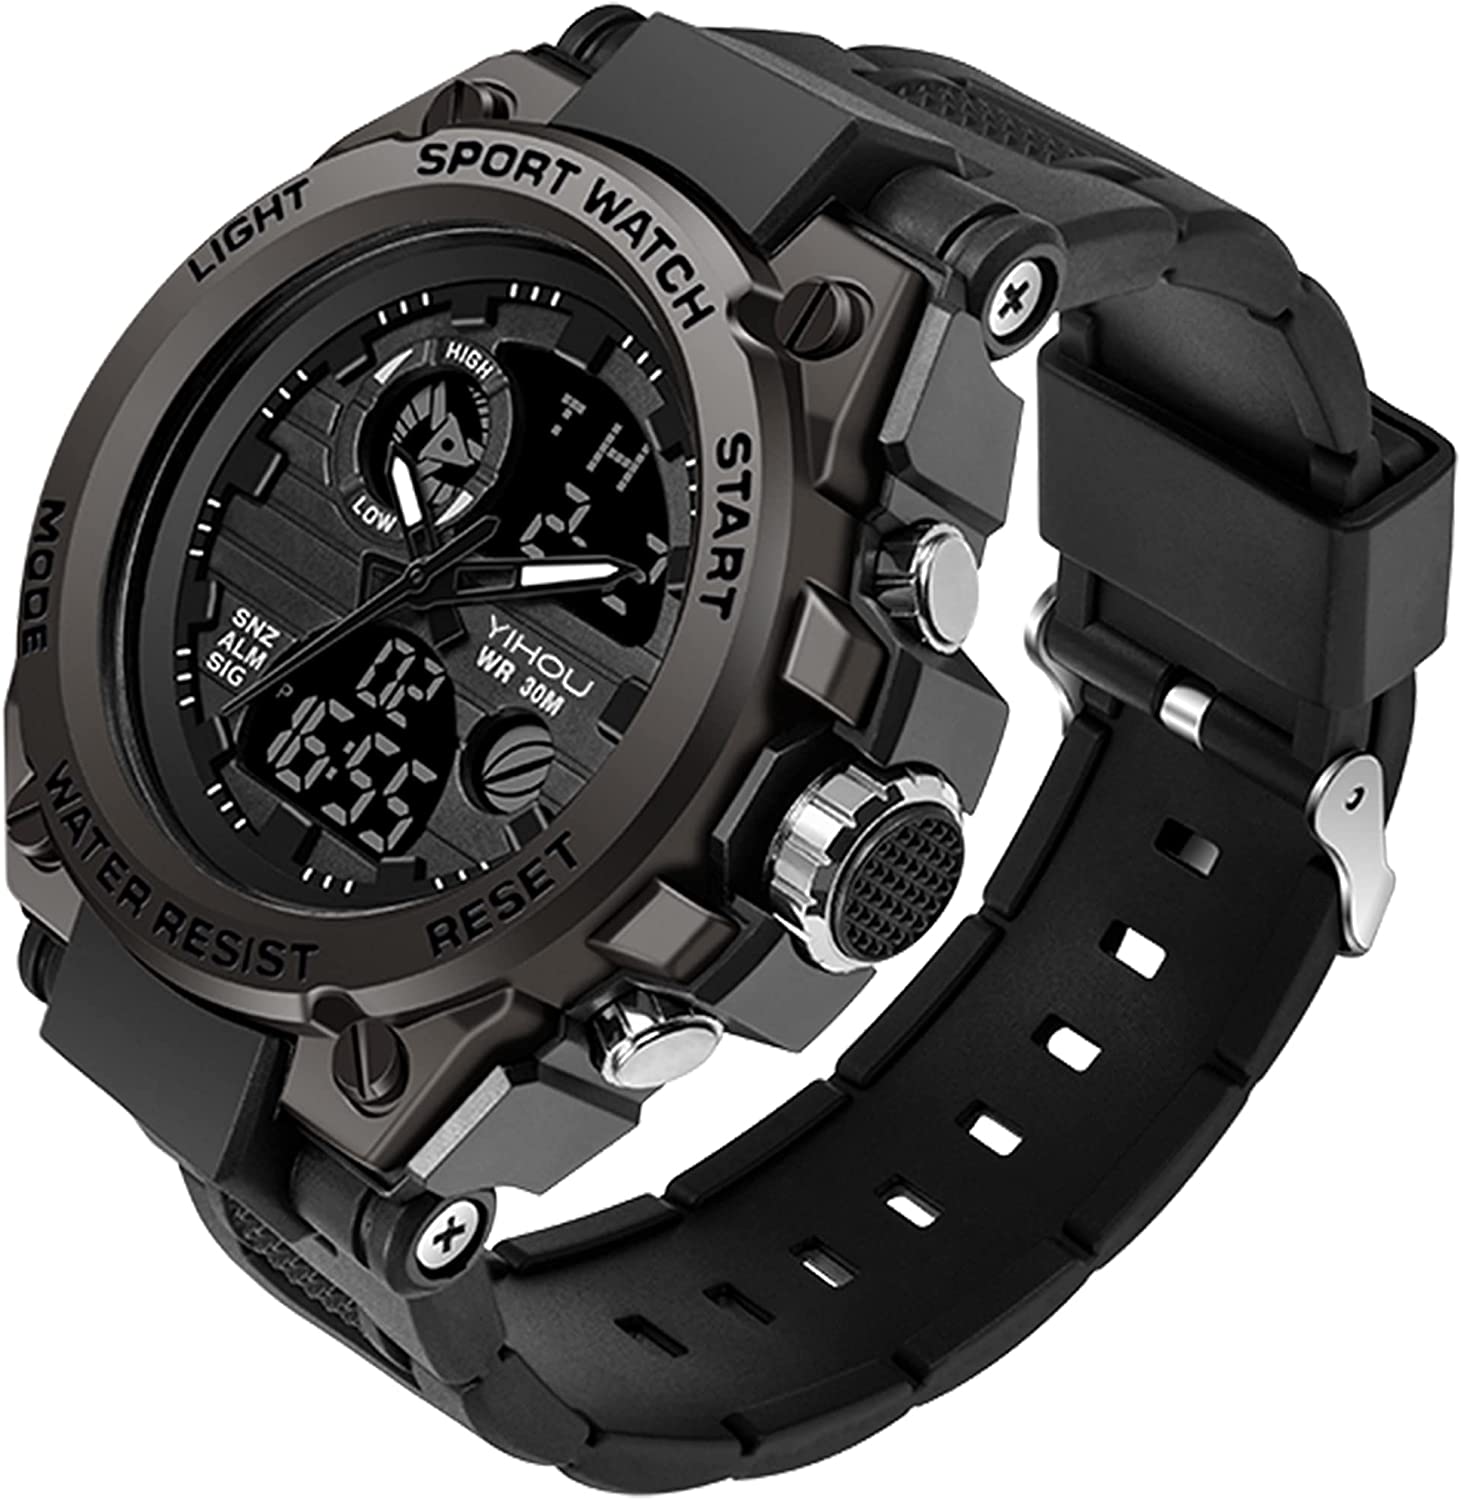 Multi-Functional Military-Grade Outdoor Sports Watch-Topselling